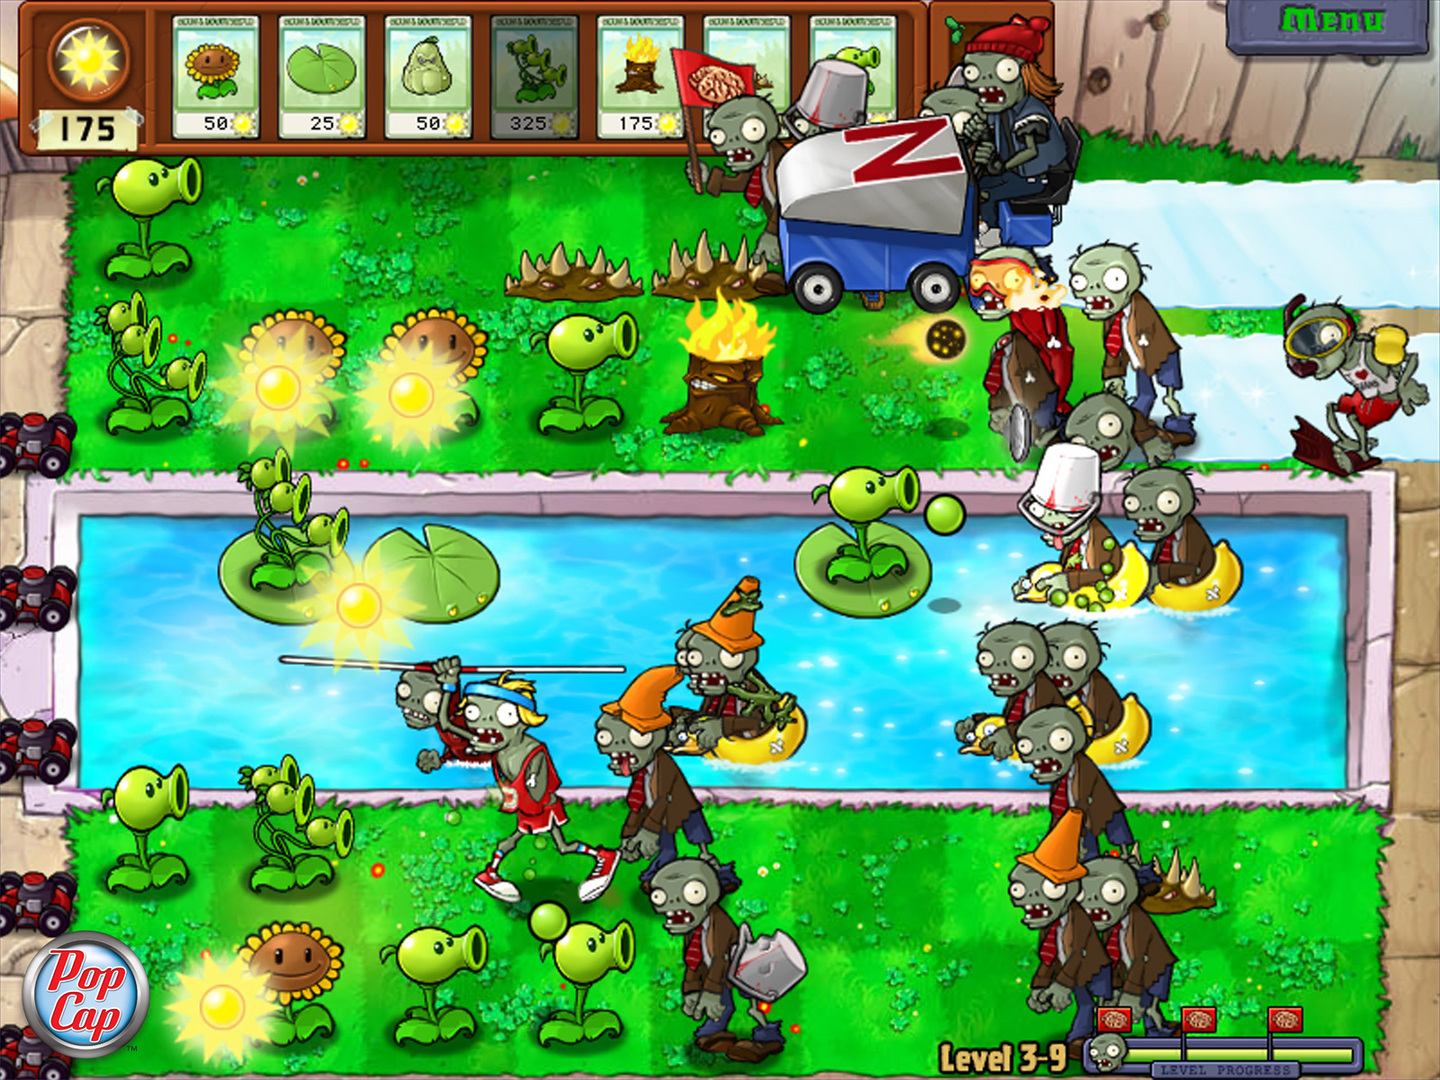 Save 80% on Plants vs. Zombies GOTY Edition on Steam